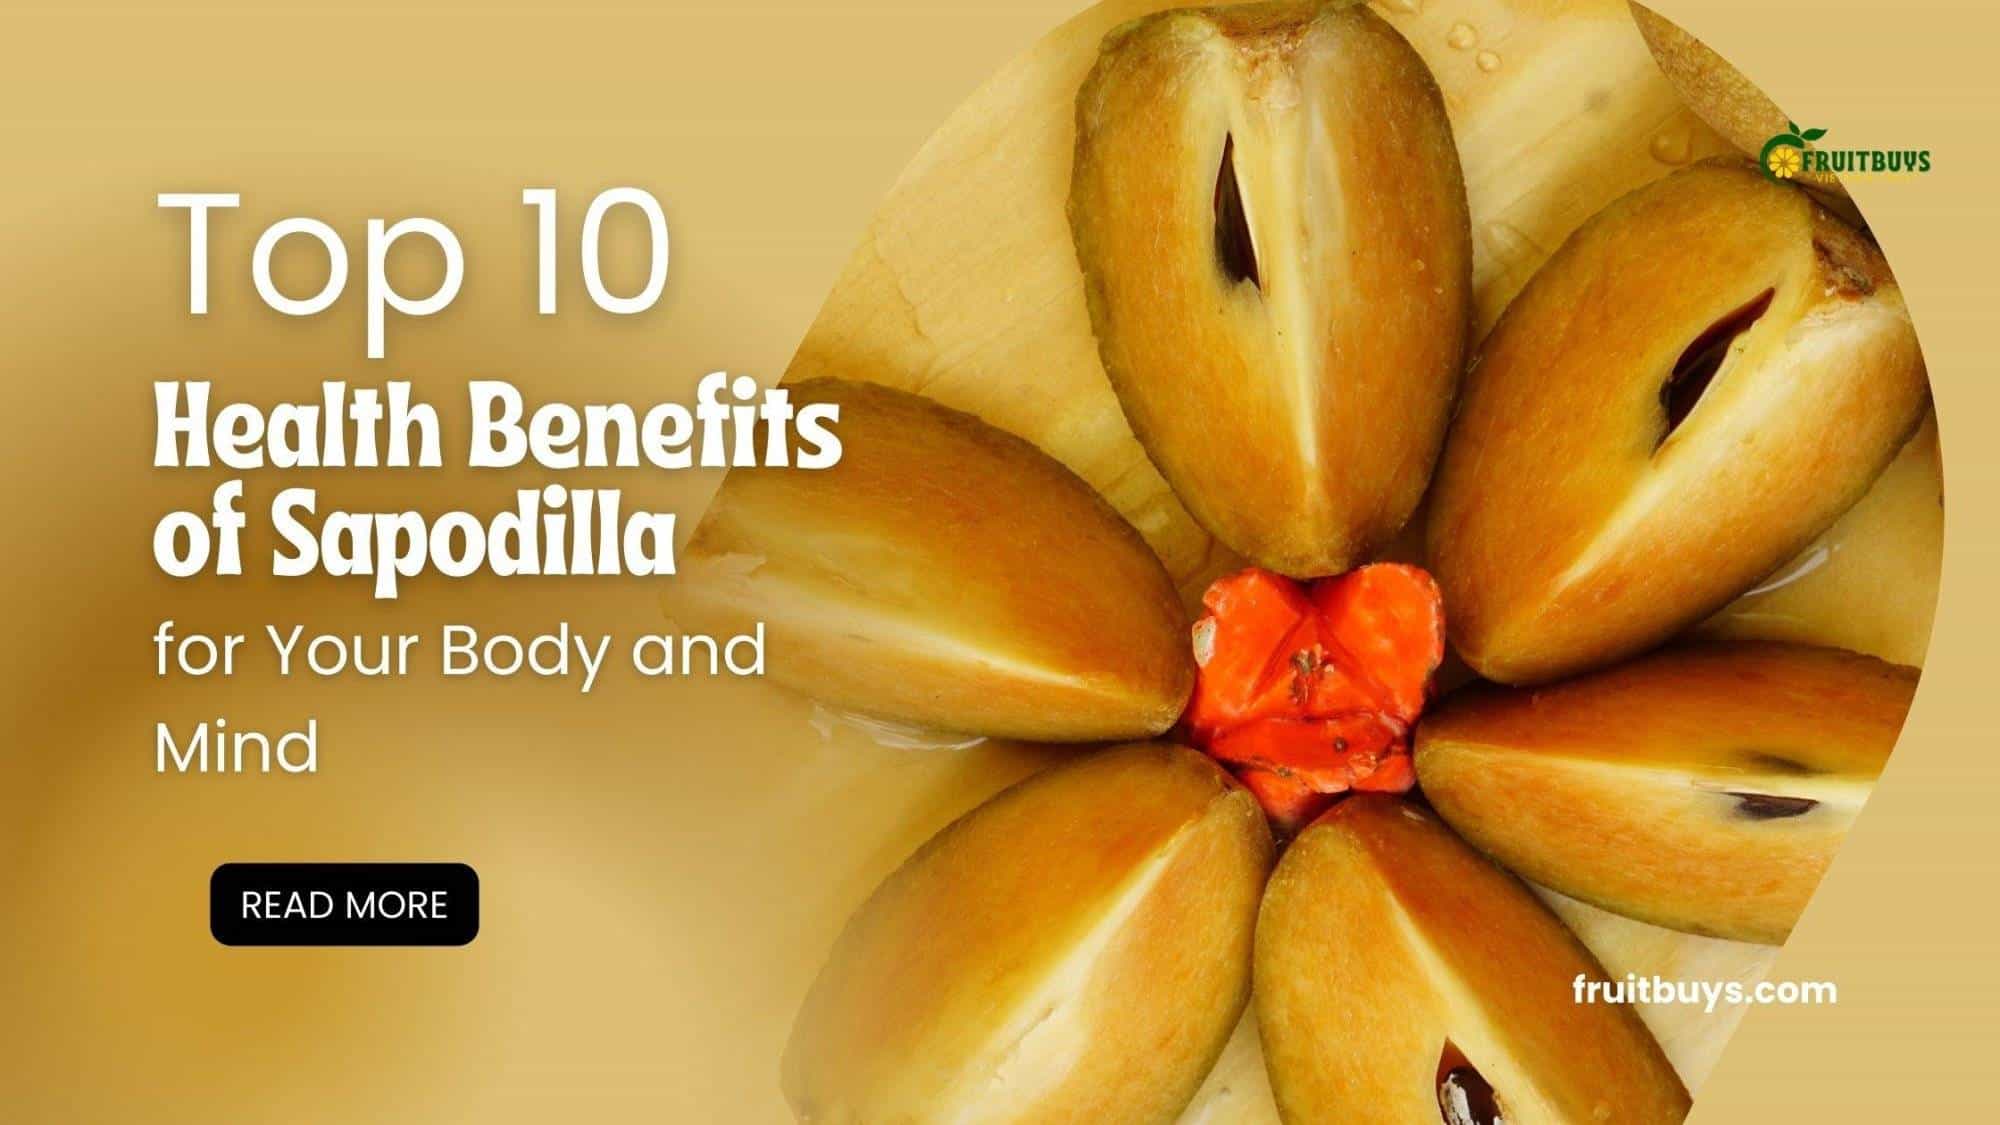 FruitBuys Vietnam  Top 10 Health Benefits Of Sapodilla For Your Body And Mind